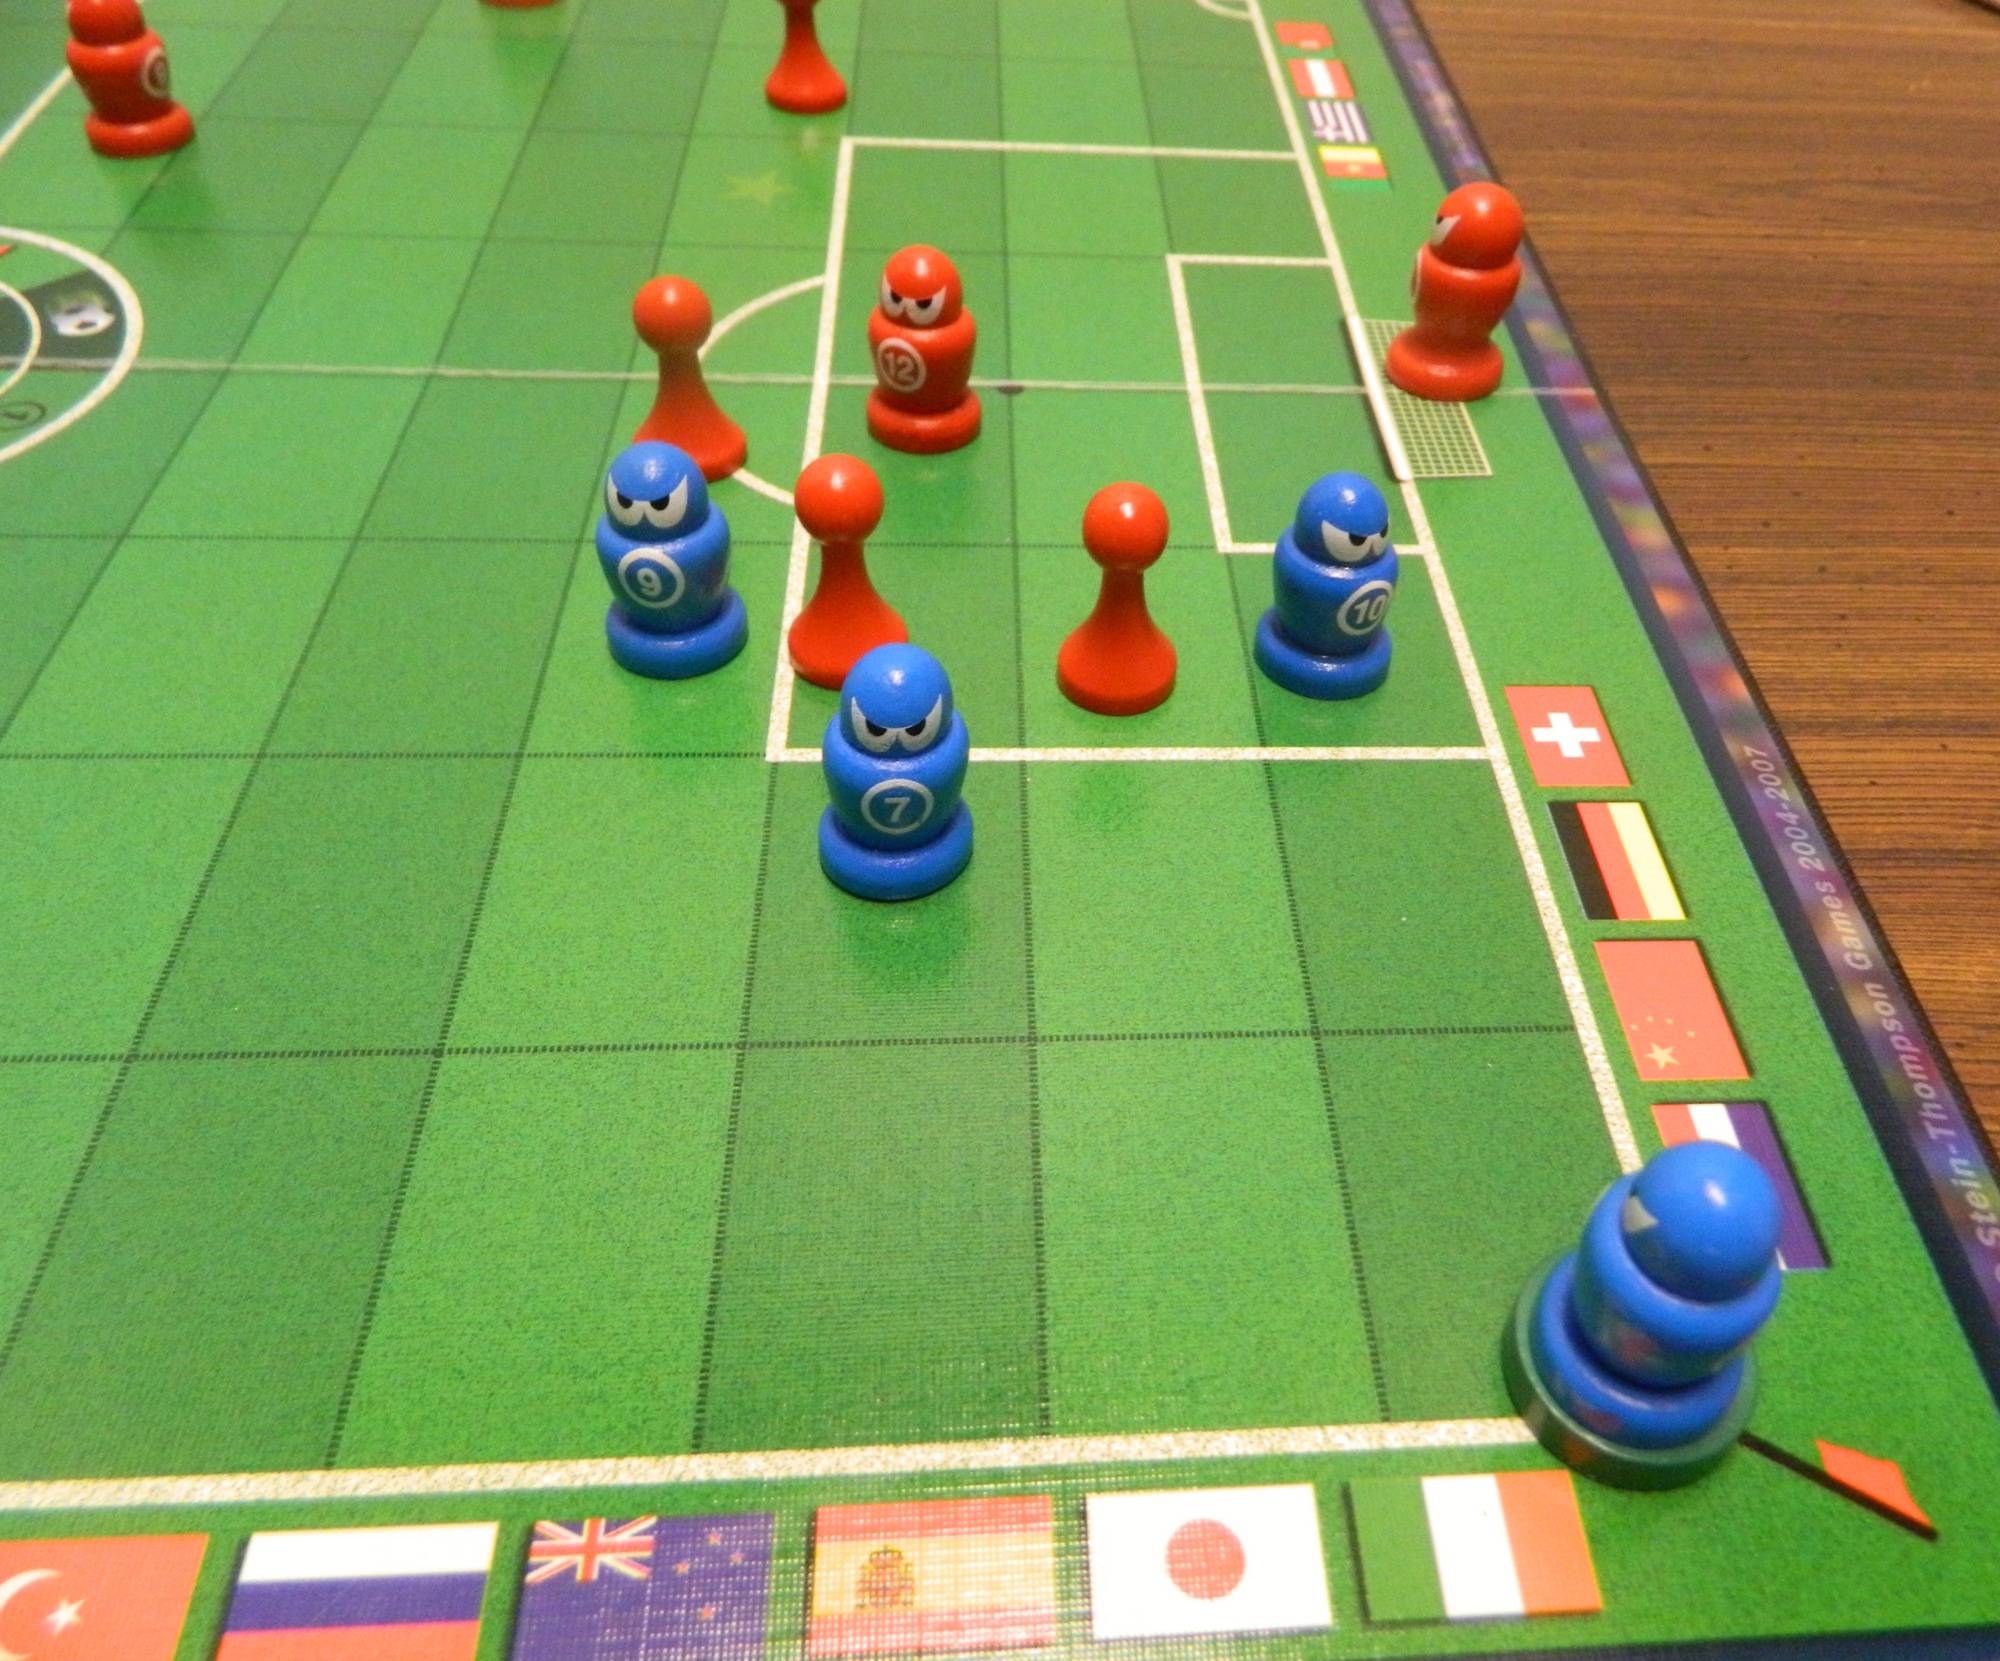 Soccer Tactics World Board Game Review and Rules | Geeky Hobbies